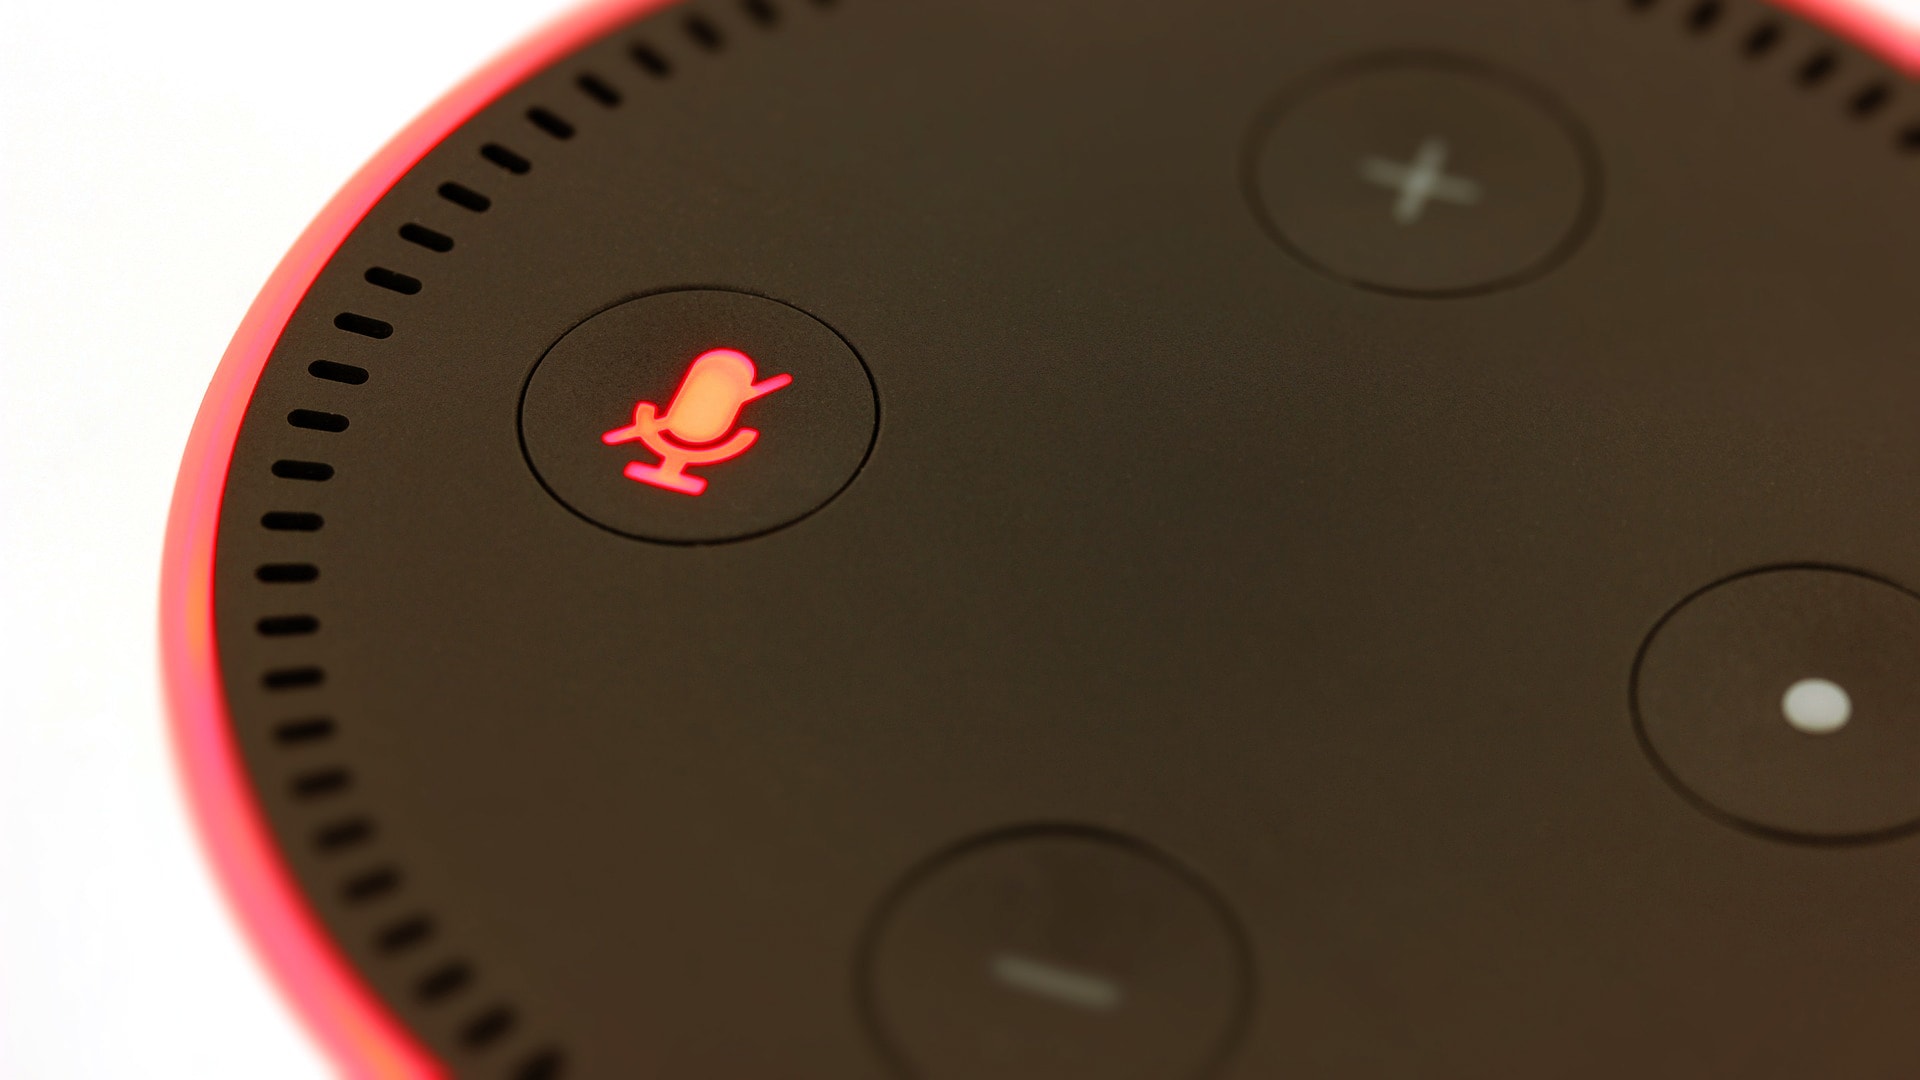 Researchers say they tricked Alexa into spying on them